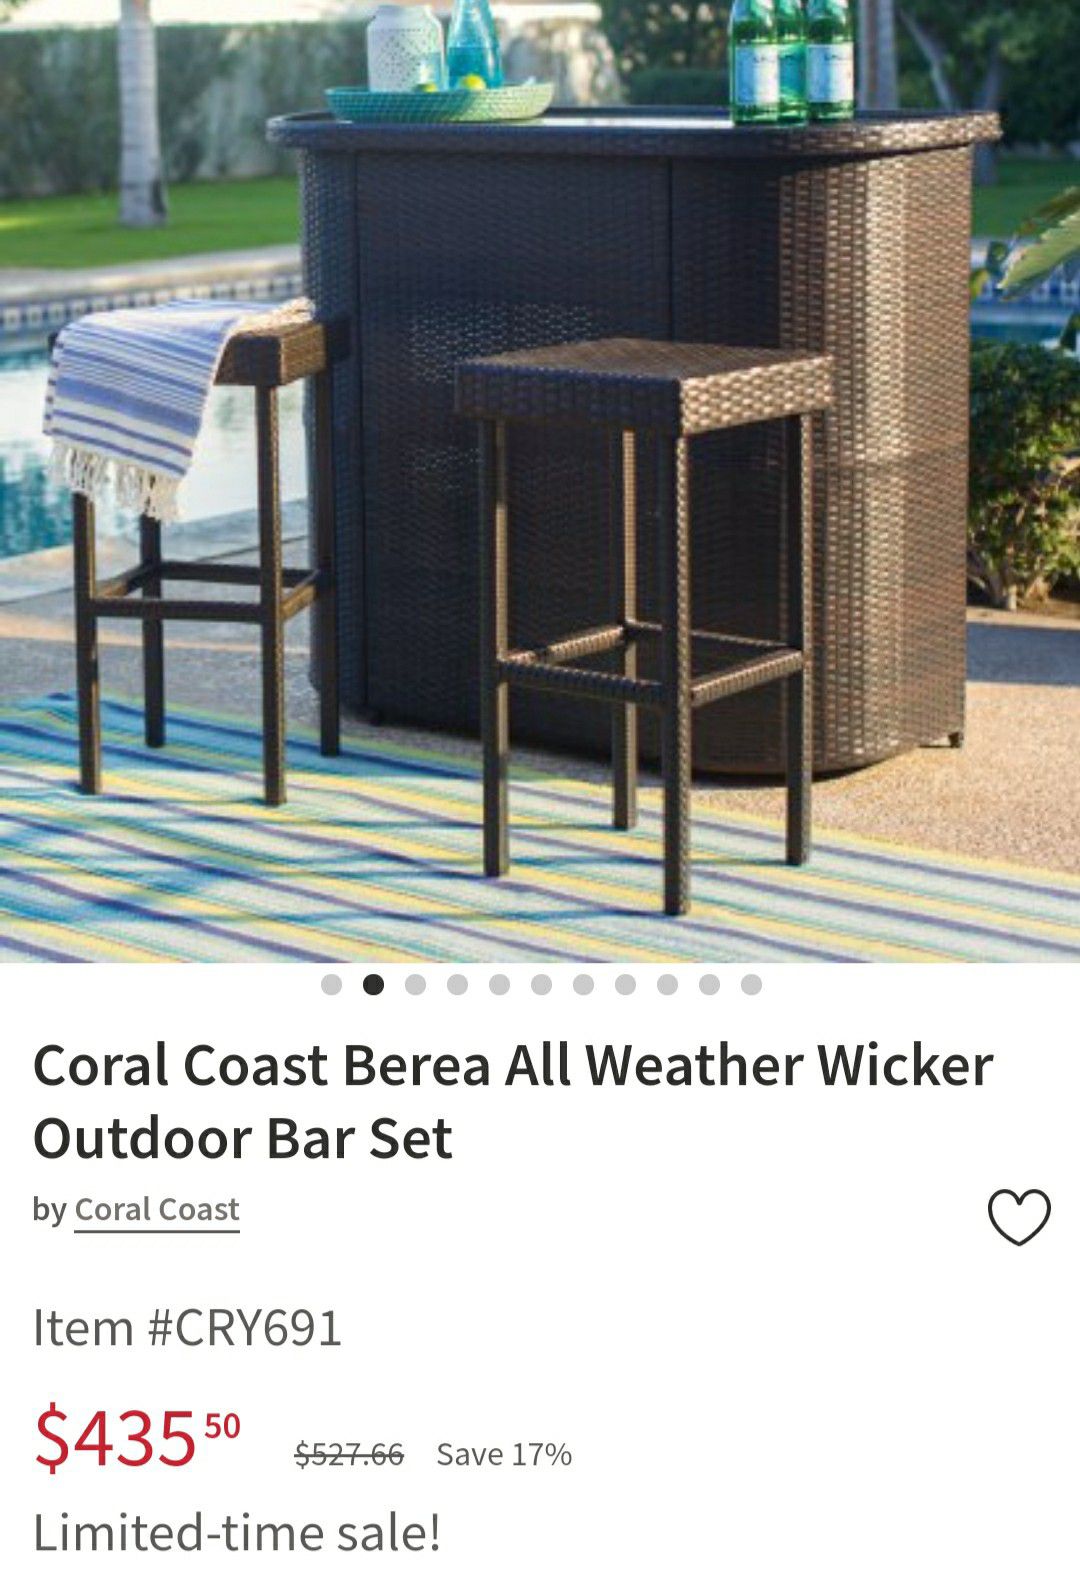 All weather wicker tiki bar with 2 stools (slightly used)